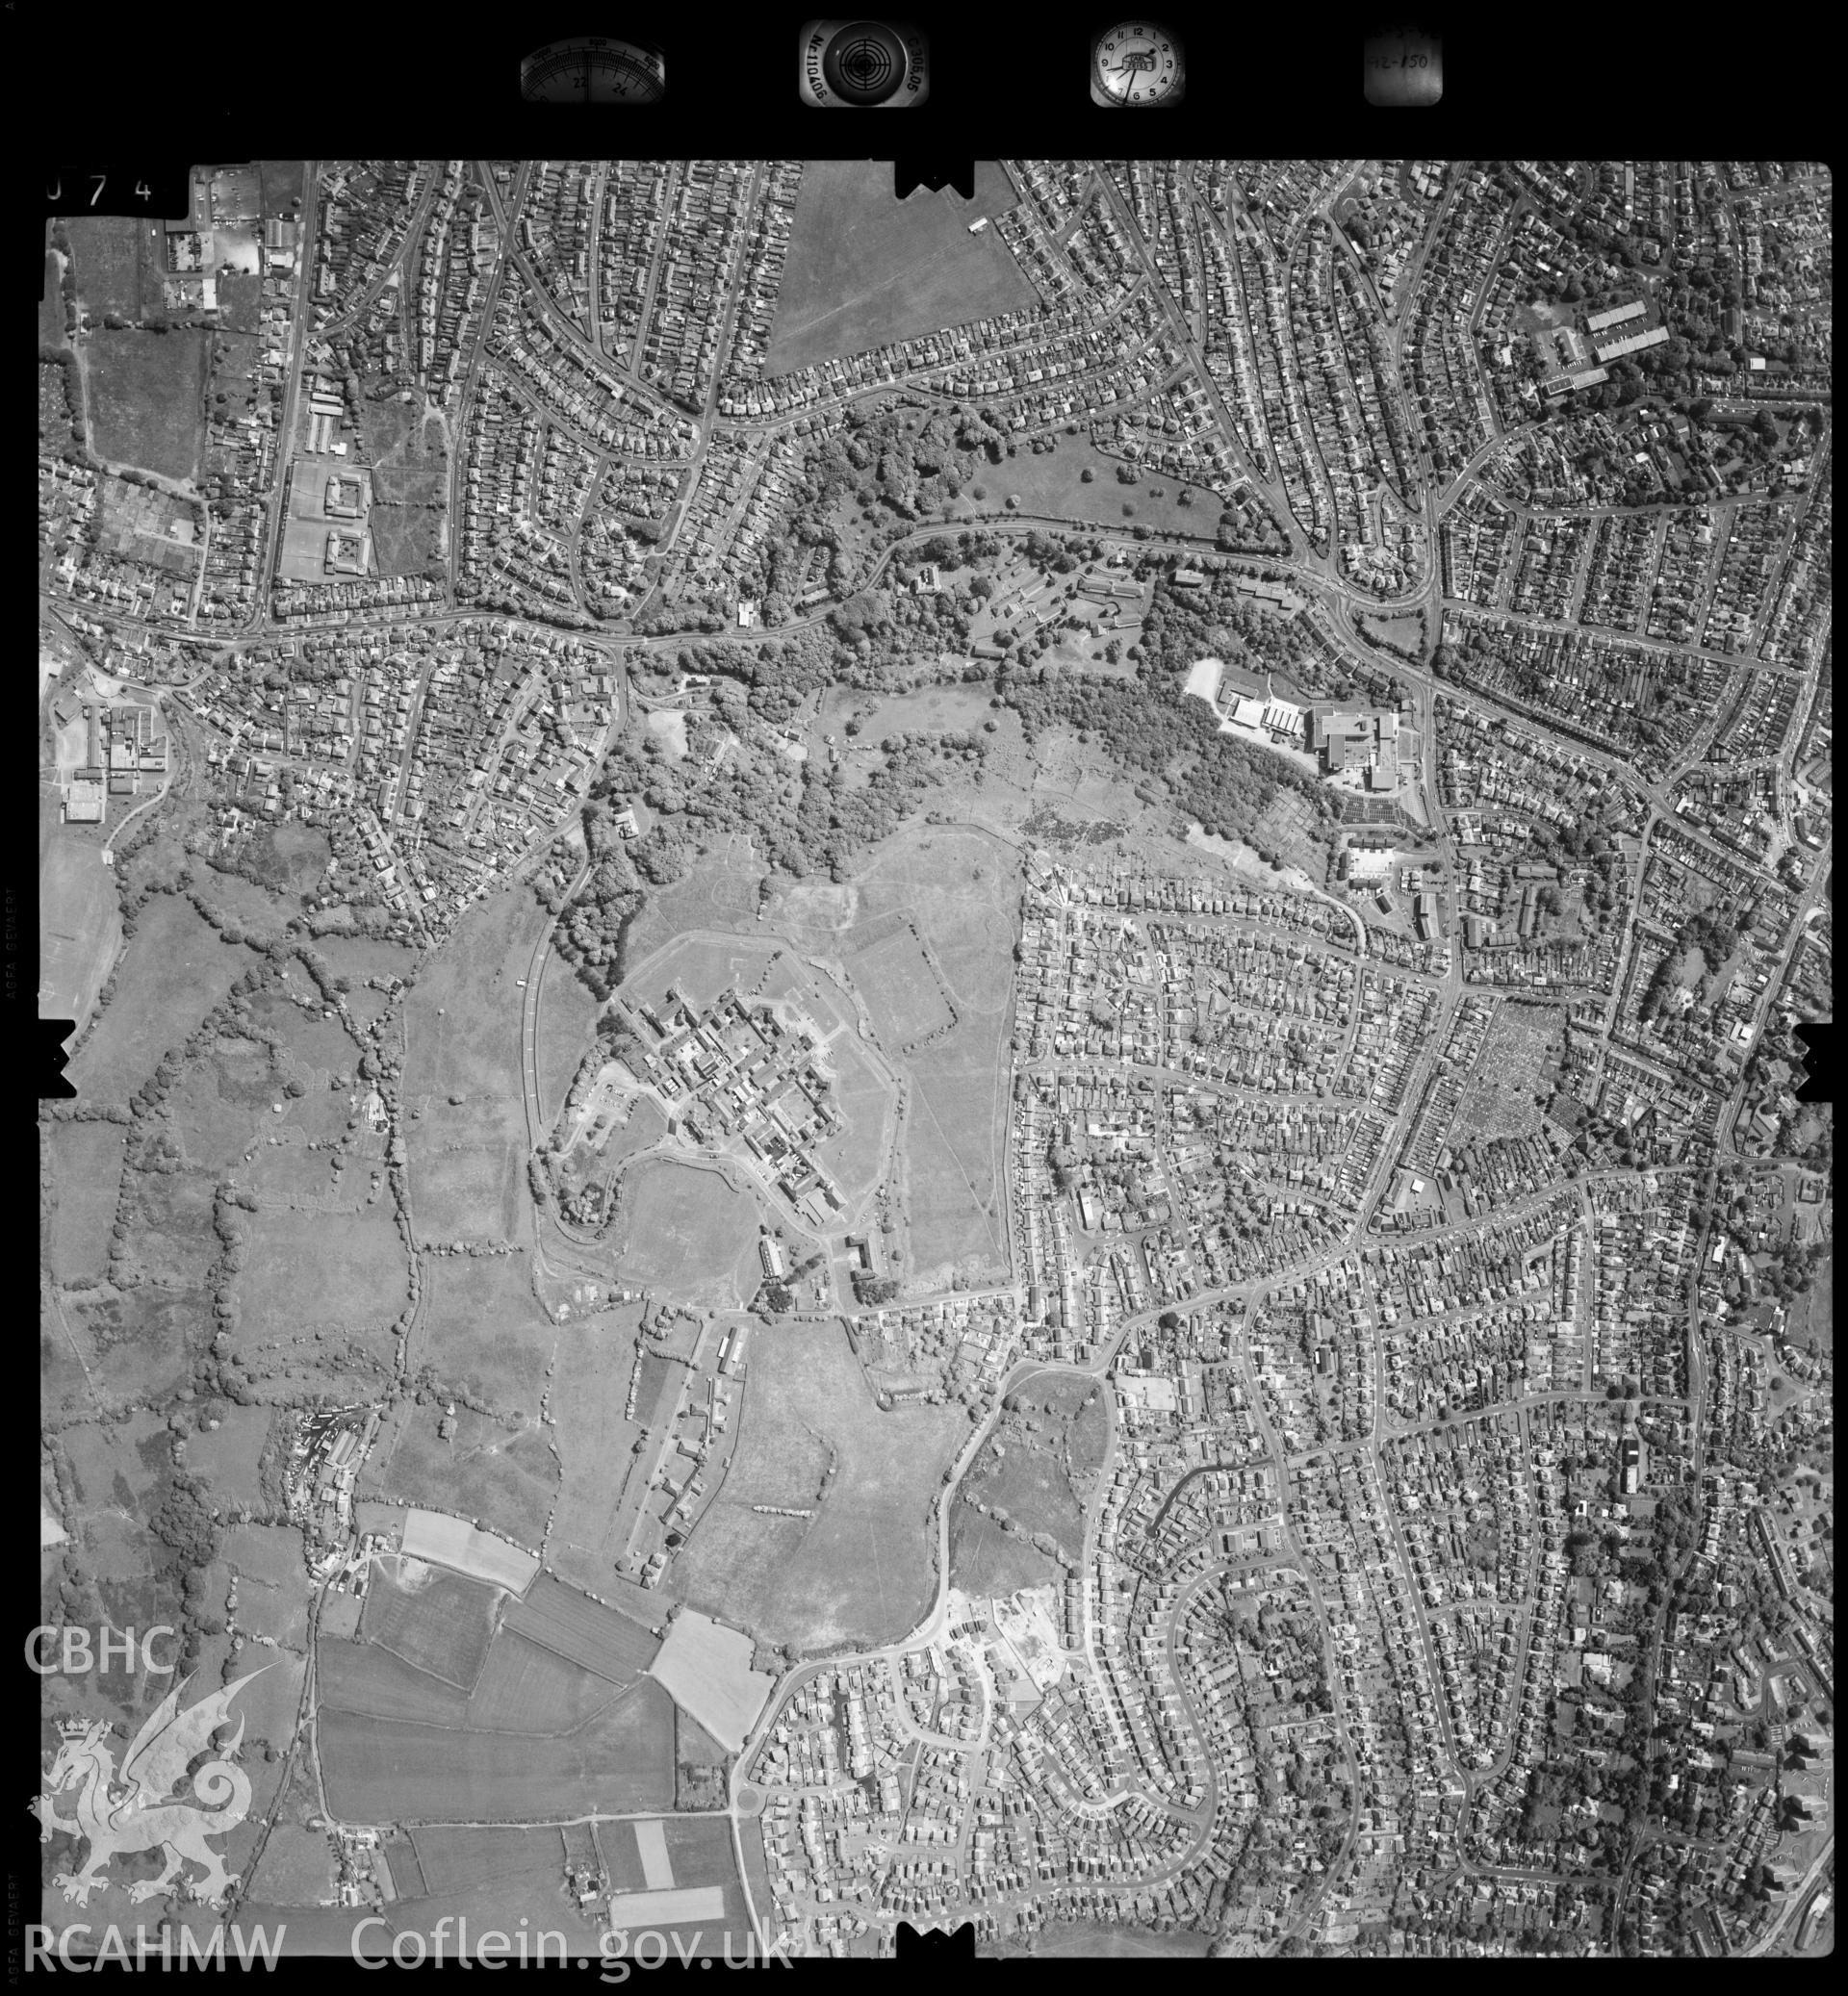 Digitized copy of an aerial photograph showing the Sketty area of Swansea, taken by Ordnance Survey, 1992.